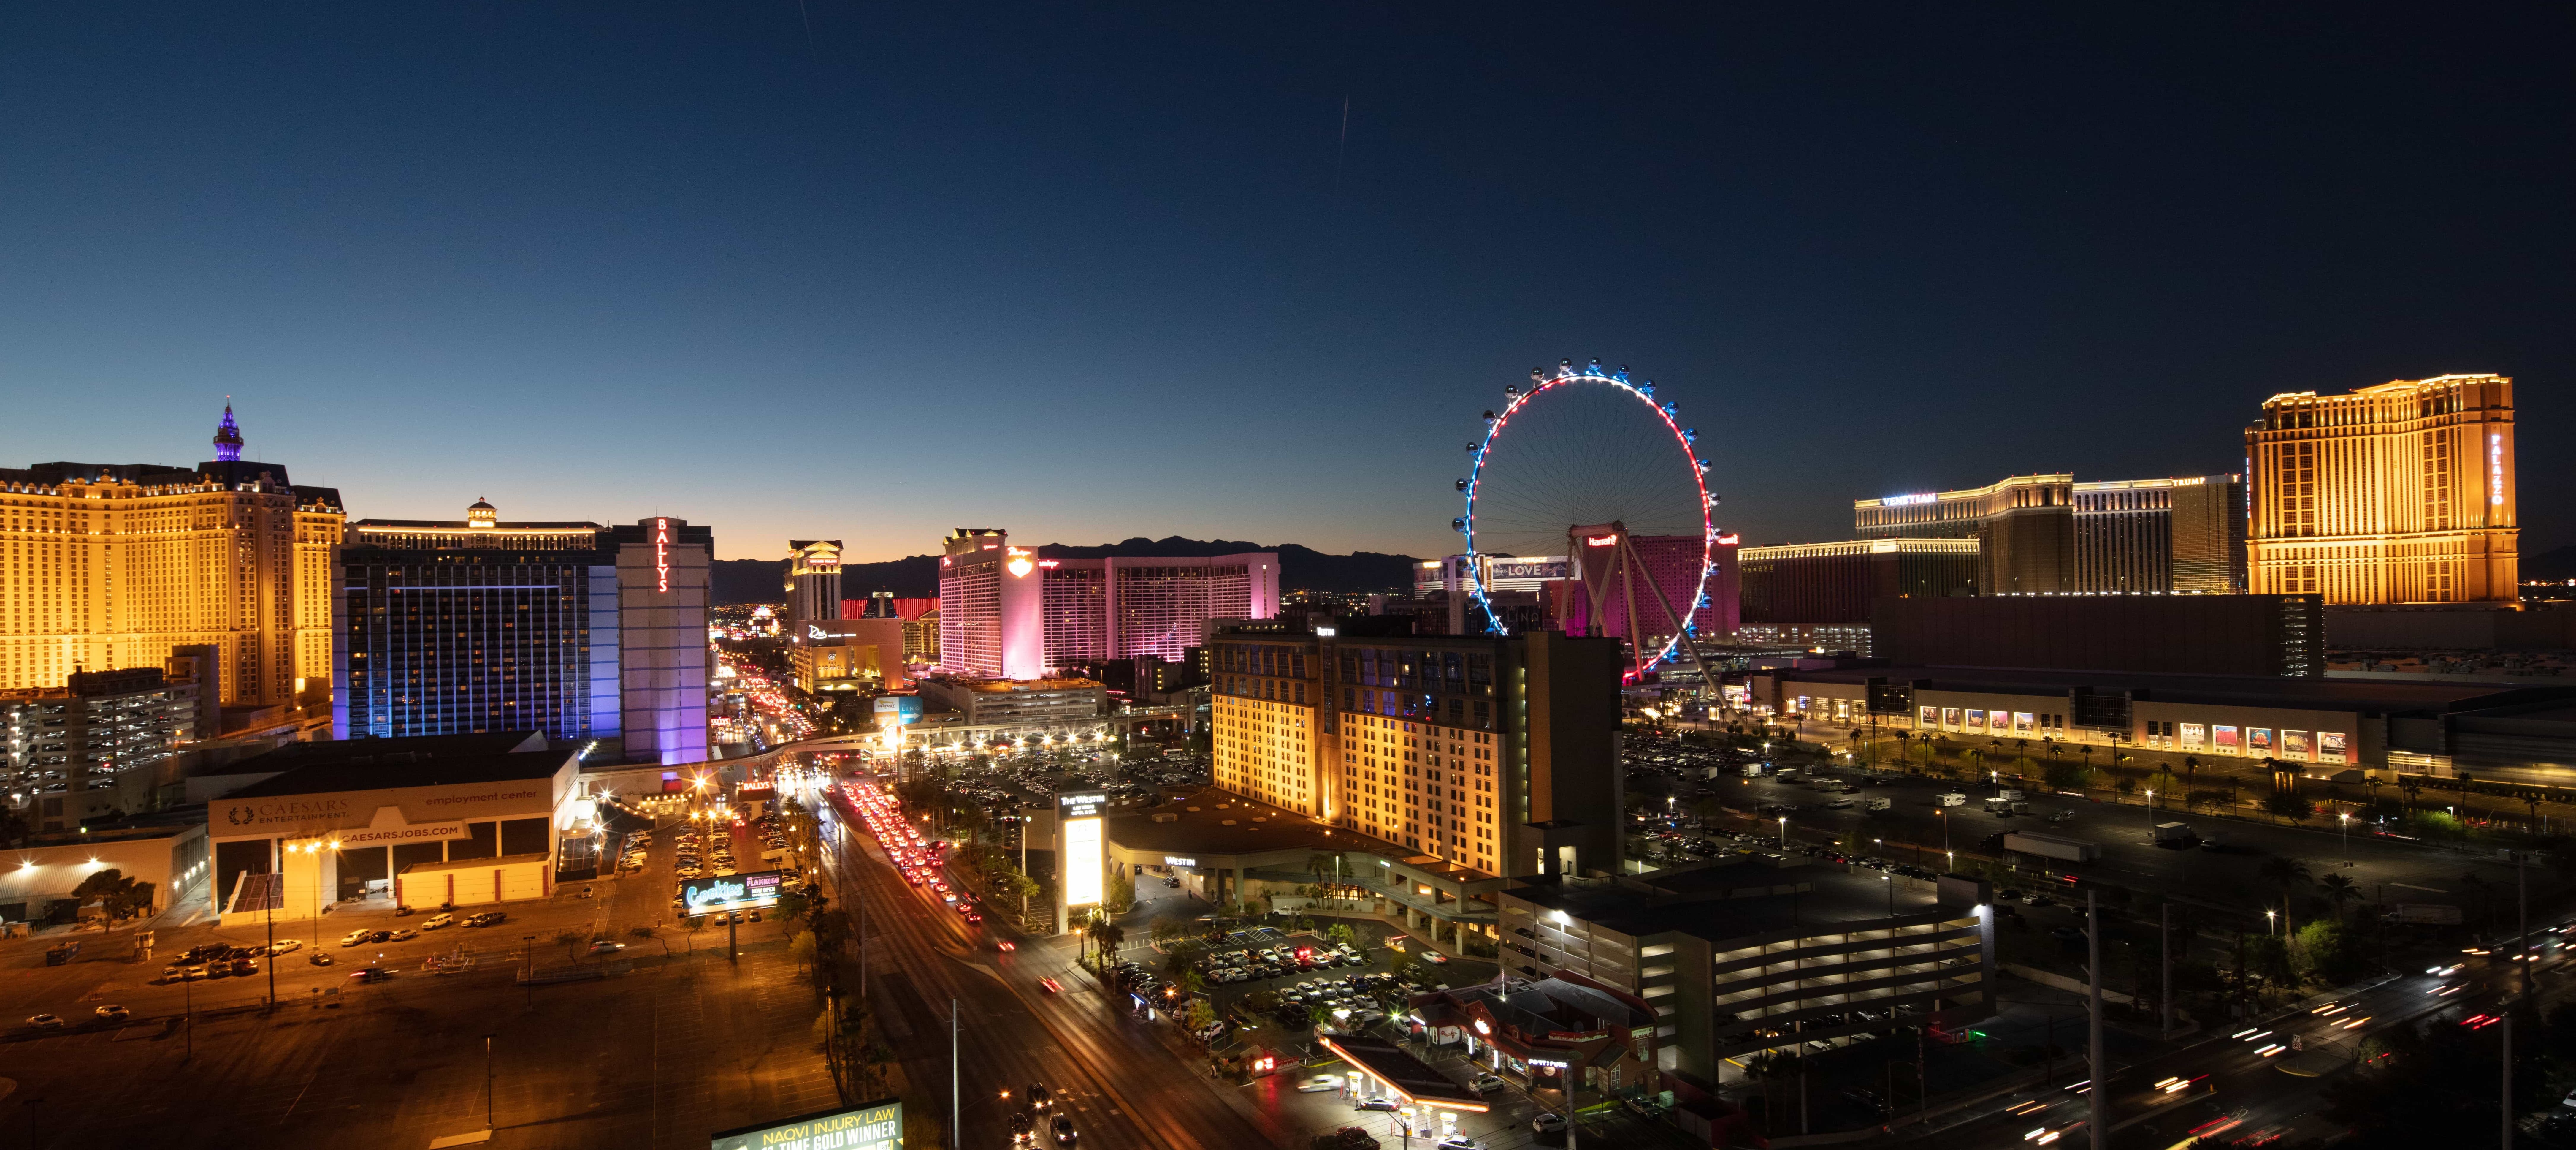 Aerial shot and view of the Las Vegas strip from The Platinum Hotel.